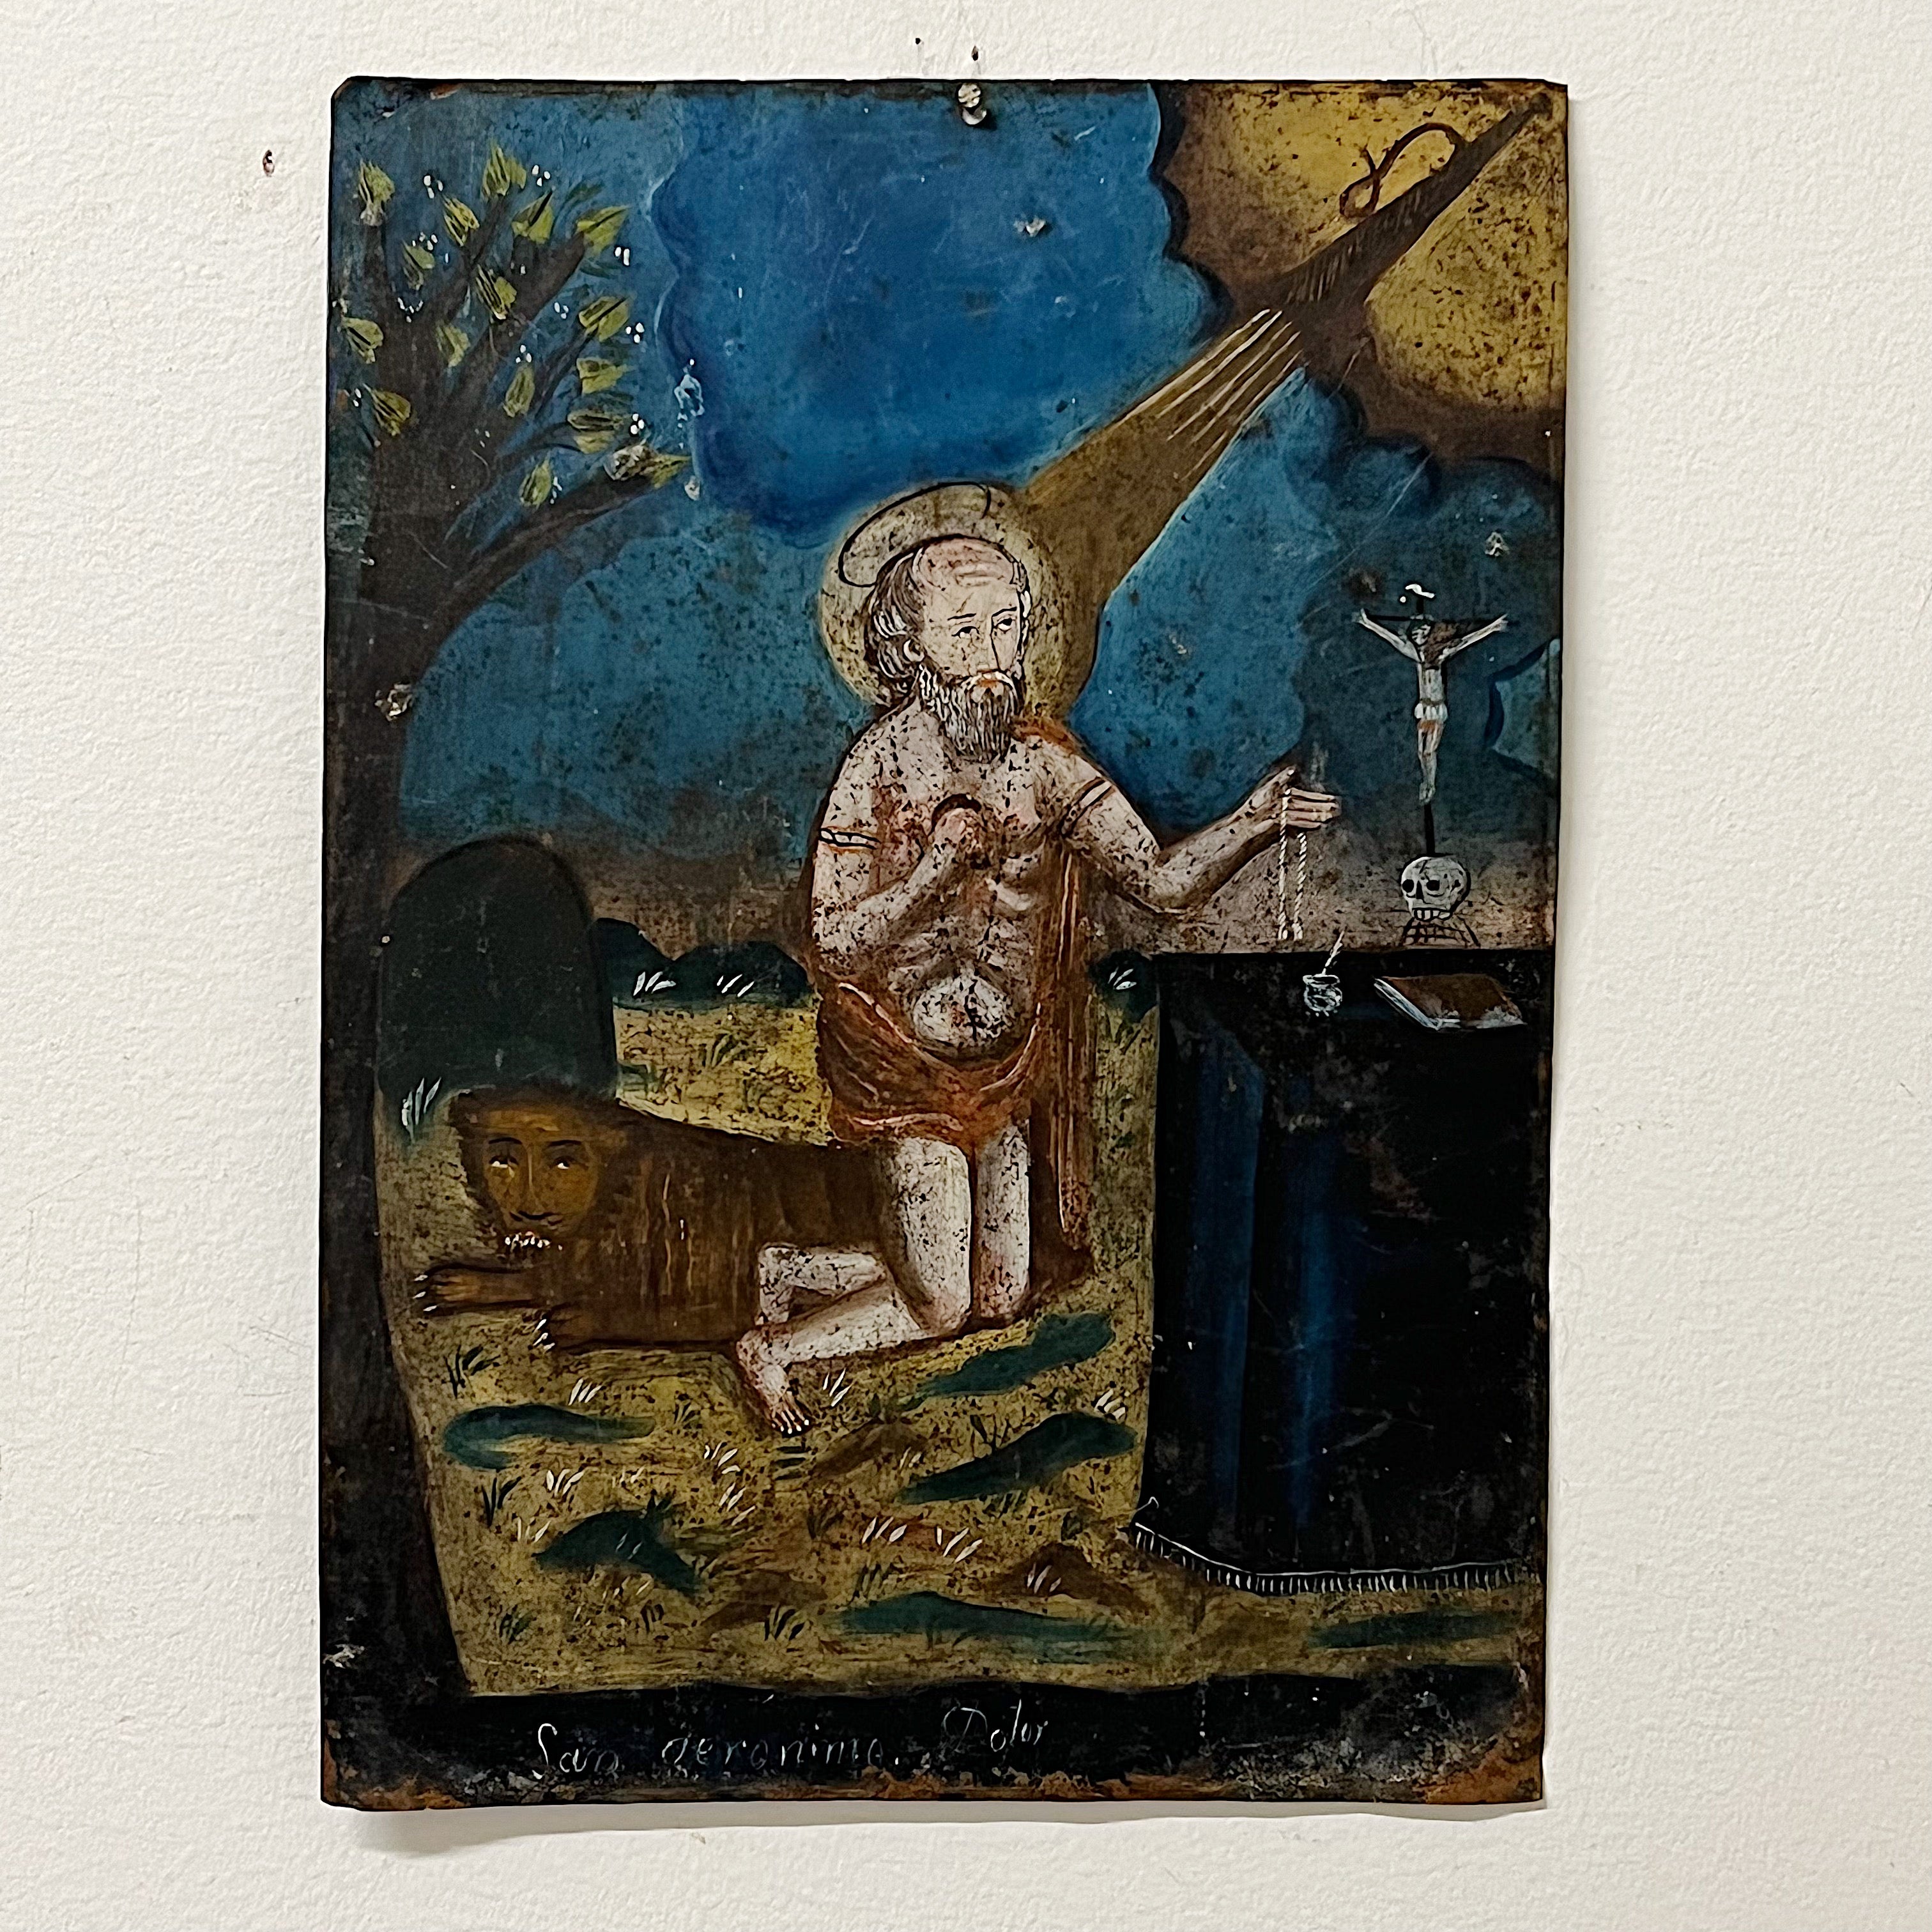 Rare 19th Century Tin Retablo of Saint Jerome and Lion - Turn of the Century - Rare Antique Mexican Art - 1700s 1800s Painting with Skull